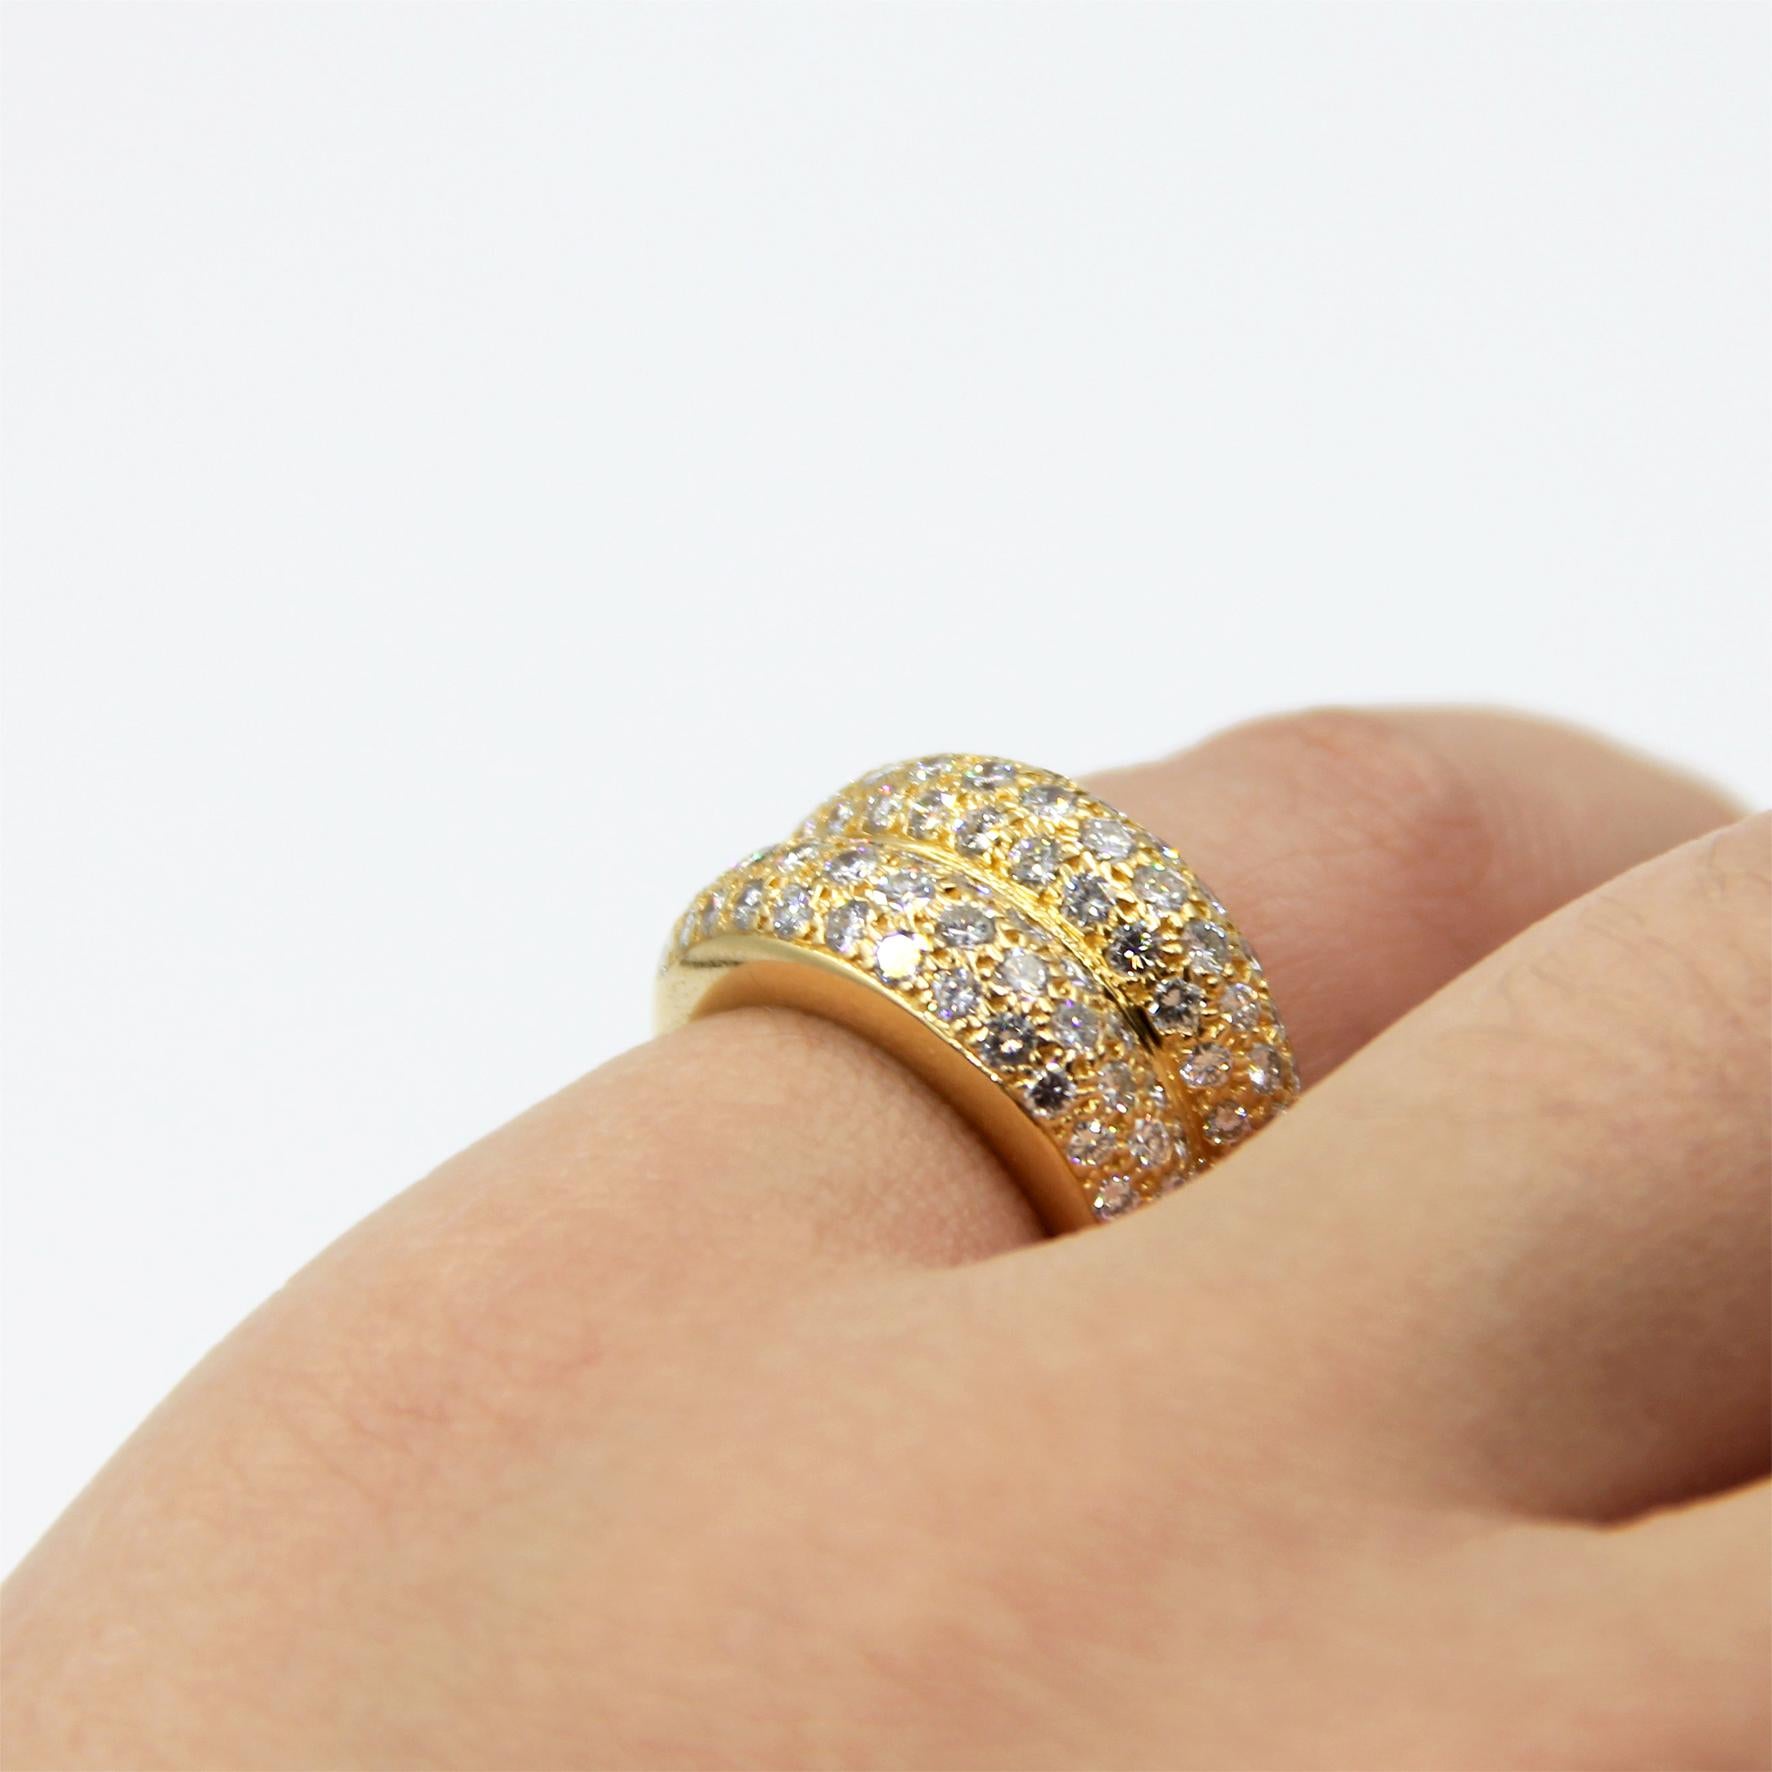 Cartier 2.50 Carat Diamond Bombe 18k Gold Ring For Sale 3